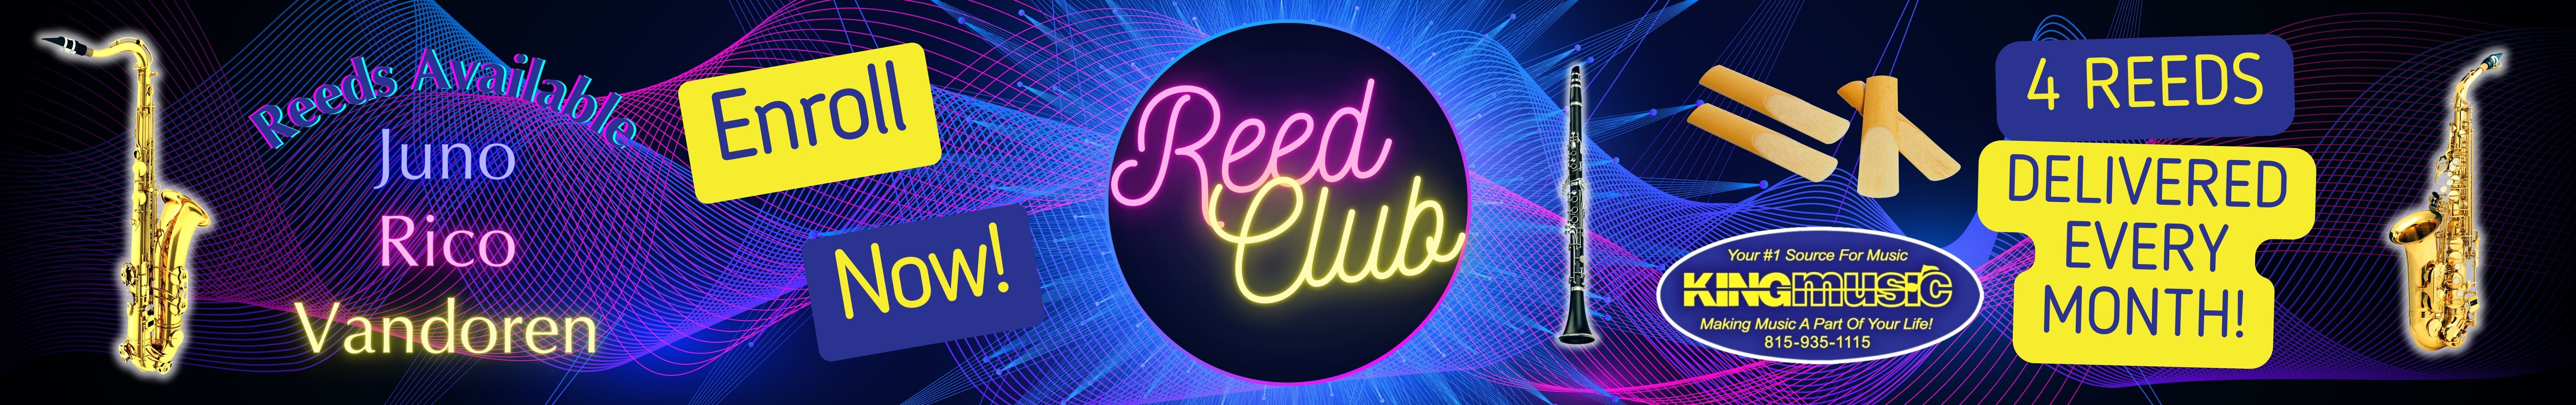 Join Reed Club!